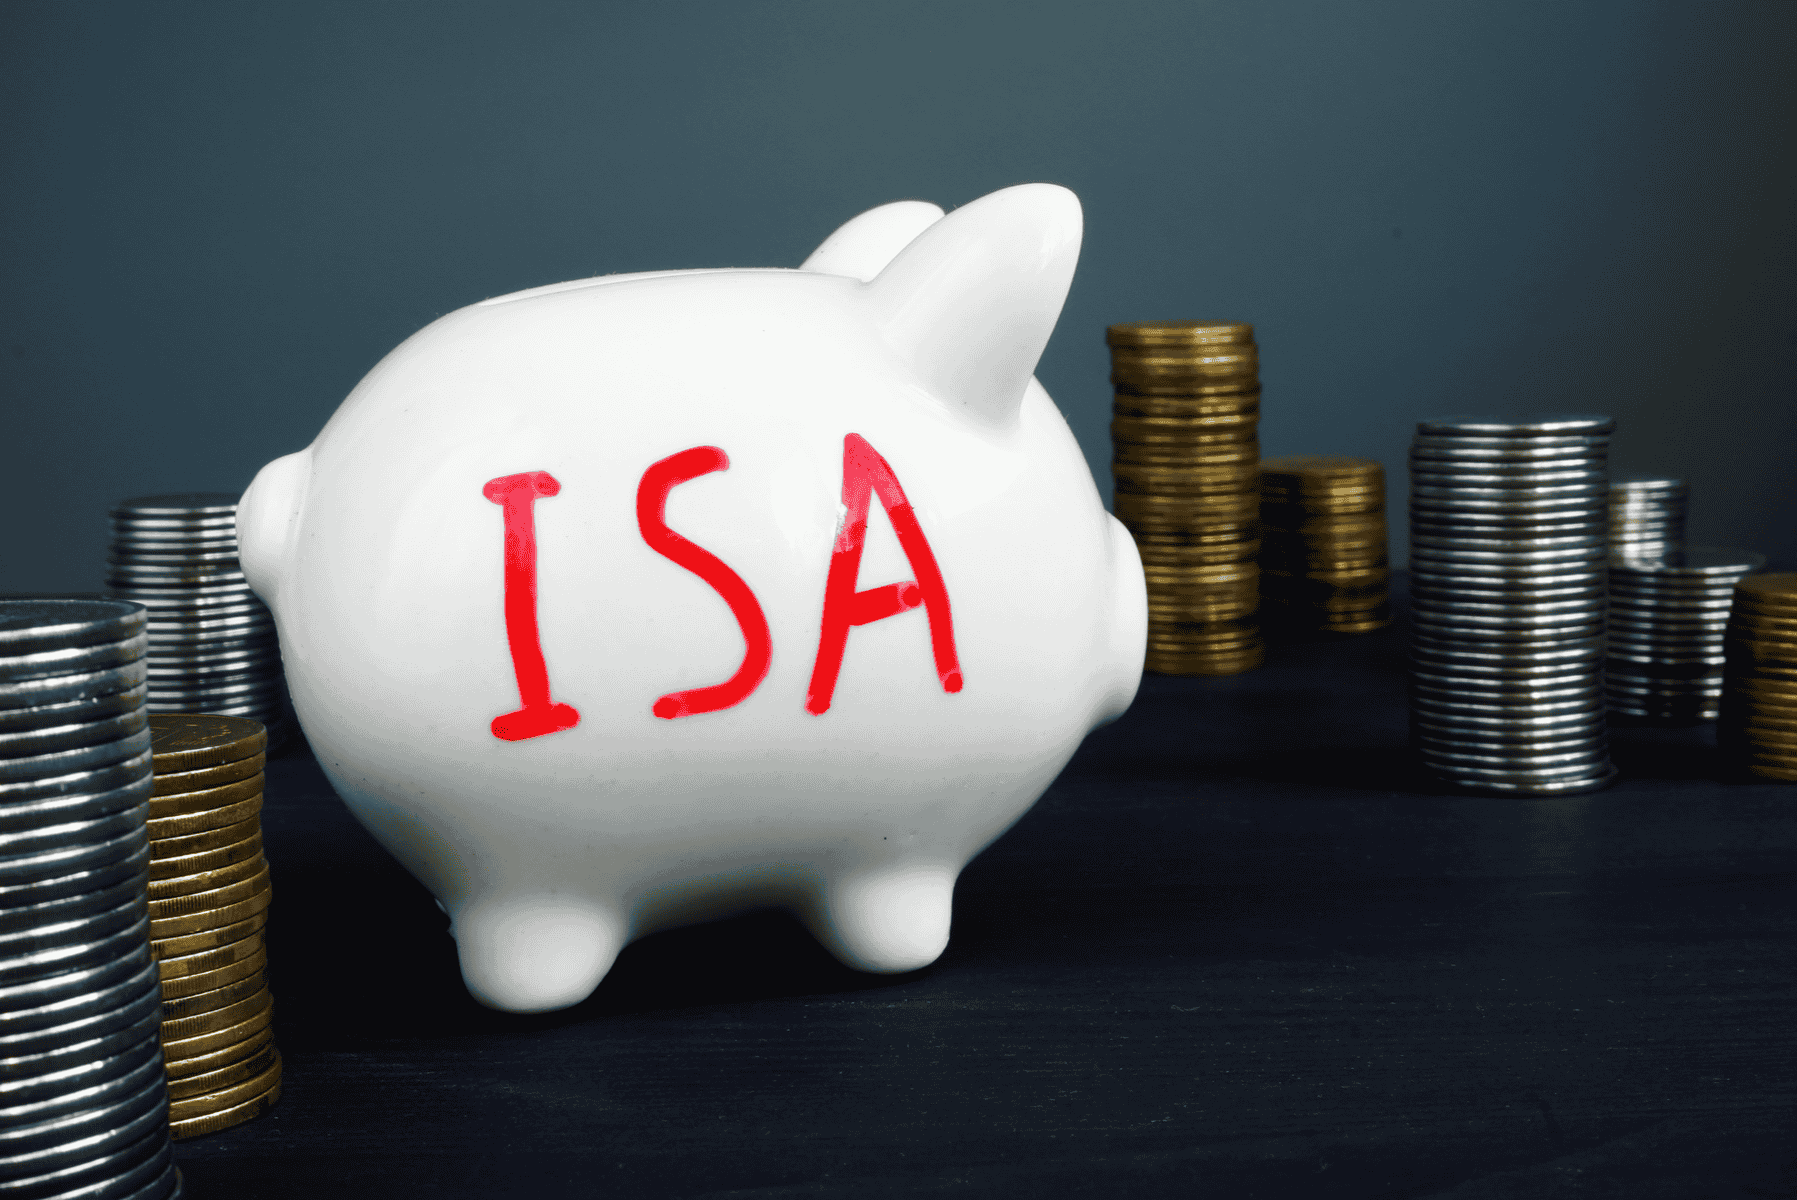 A piggy bank with "ISA" written on it surrounded by coins